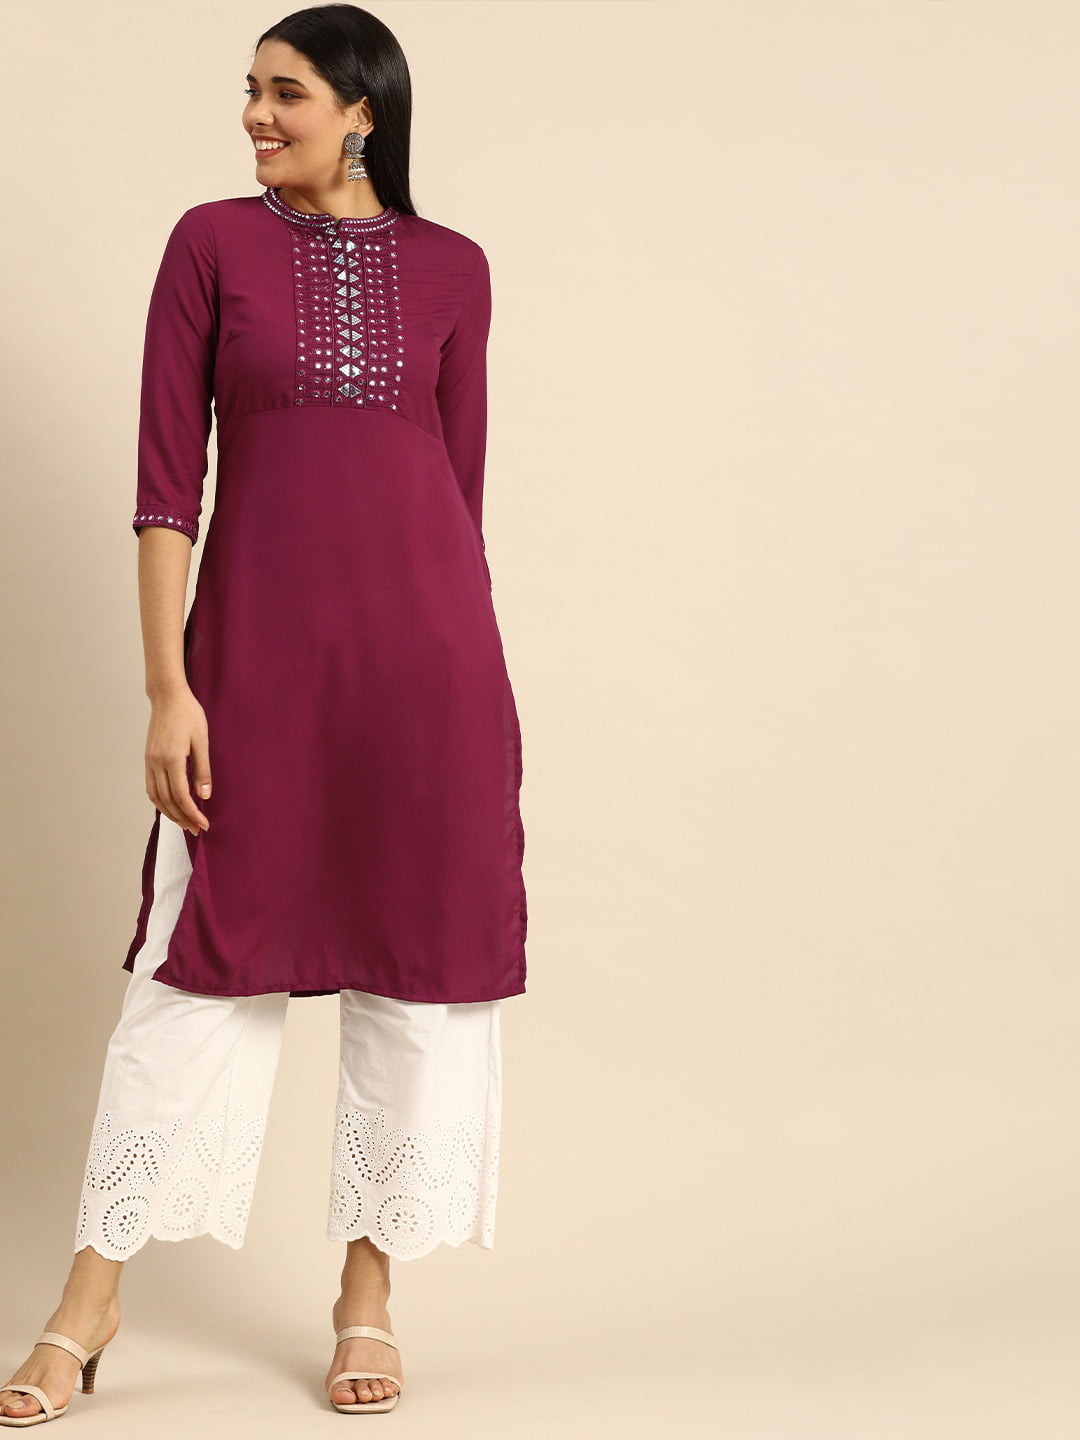 Myntra 3/4th Sleeve Kurti, Size: S, M & L at Rs 595 in Kanpur | ID:  20370958173